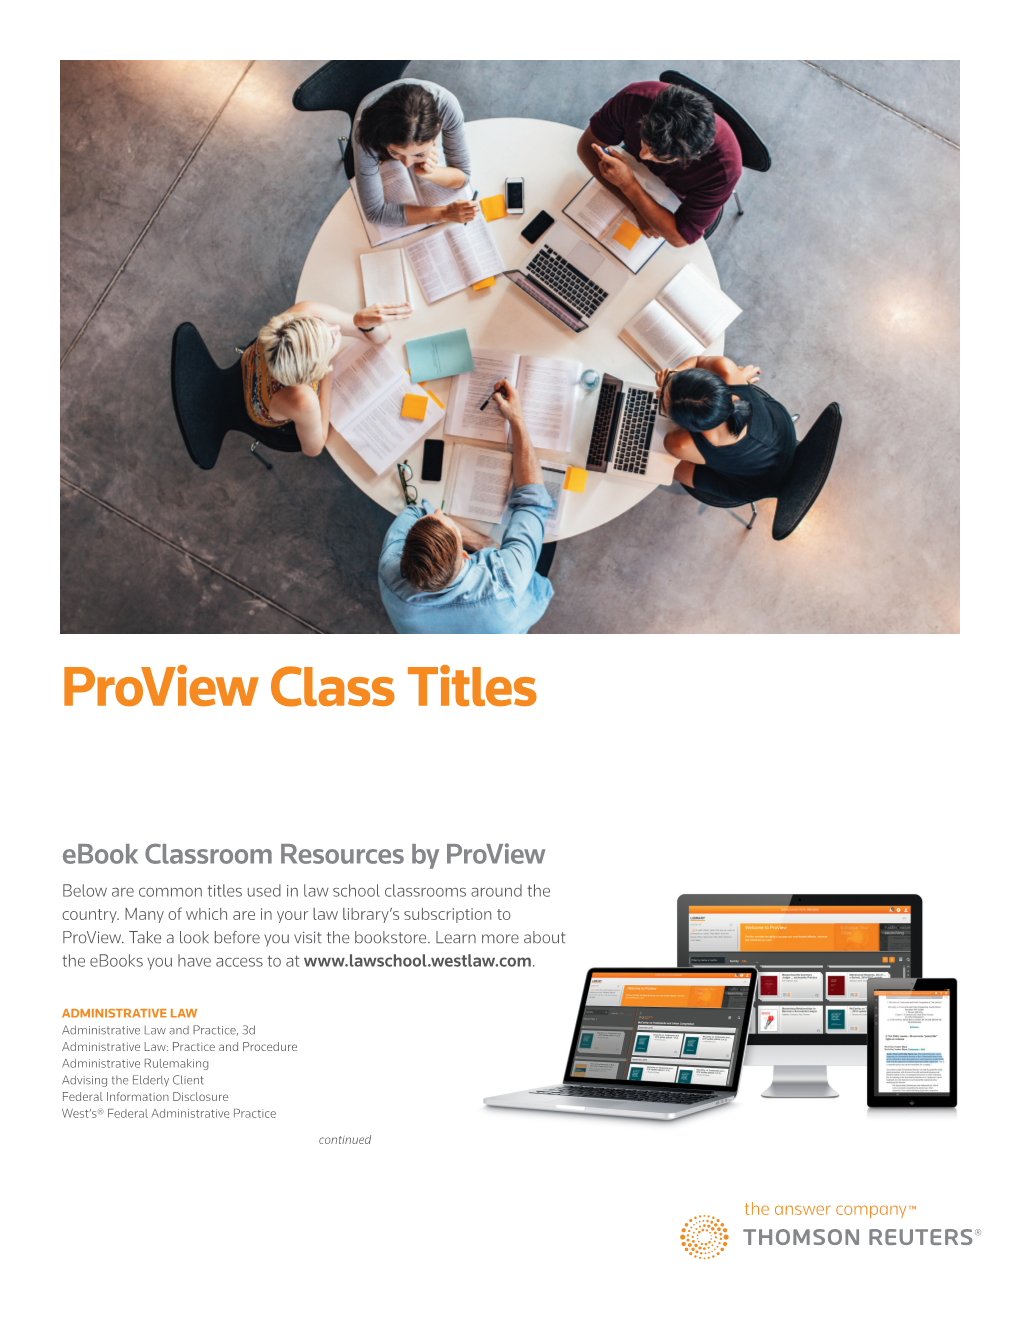 Proview Class Titles